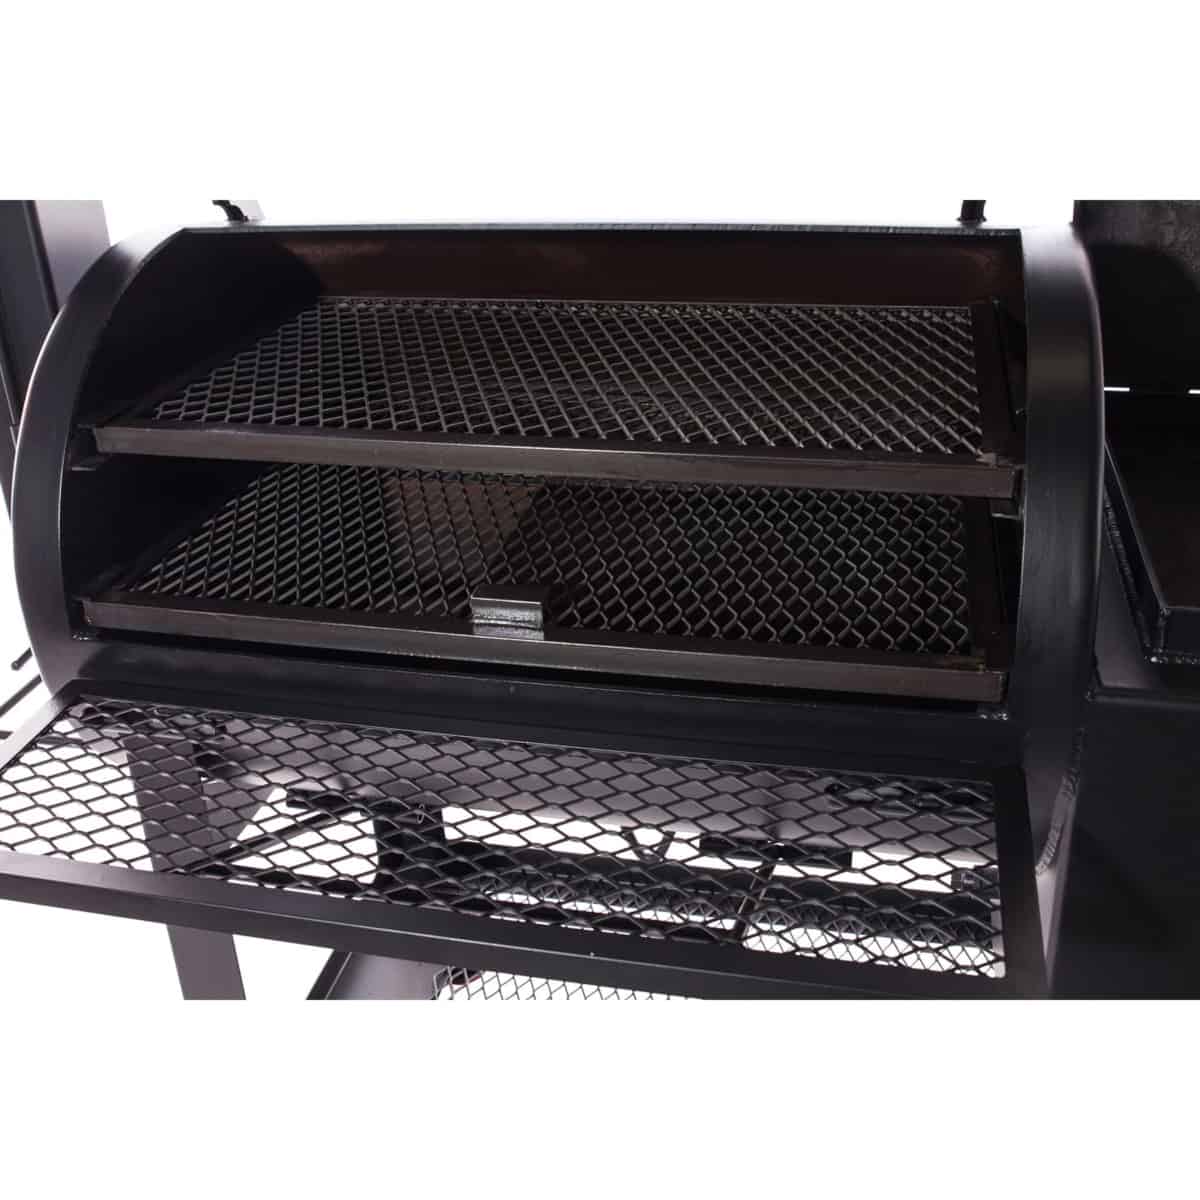 Close up of Lone Star Grillz 24 x 36 Offset main cooking chamber grates